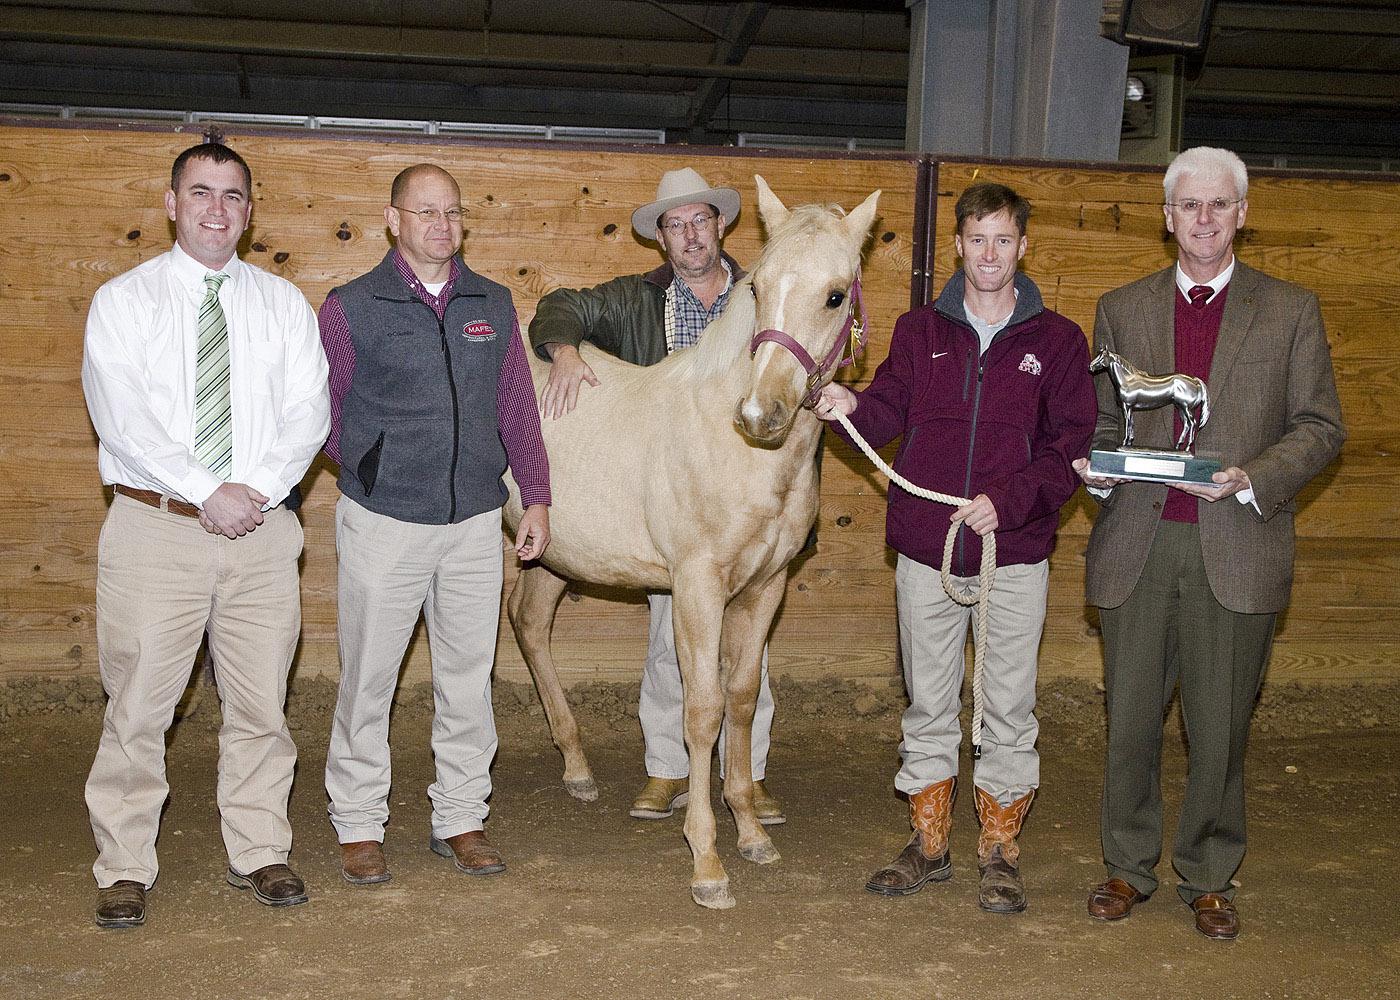 Veterinarians in the Mississippi State University College of Veterinary Medicine's theriogenology (reproduction) group stand with one of the MSU weanlings, the grandson of Dash for Cash, a champion American Quarter Horse. Pictured before the recent MSU horse sale are Drs. Heath King, David Christiansen, Richard Hopper, Kevin Walters and Peter Ryan. The AQHA recently recognized MSU for its efforts to maintain the quality of the breed. (Photo by MSU College of Veterinary Medicine/Tom Thompson)